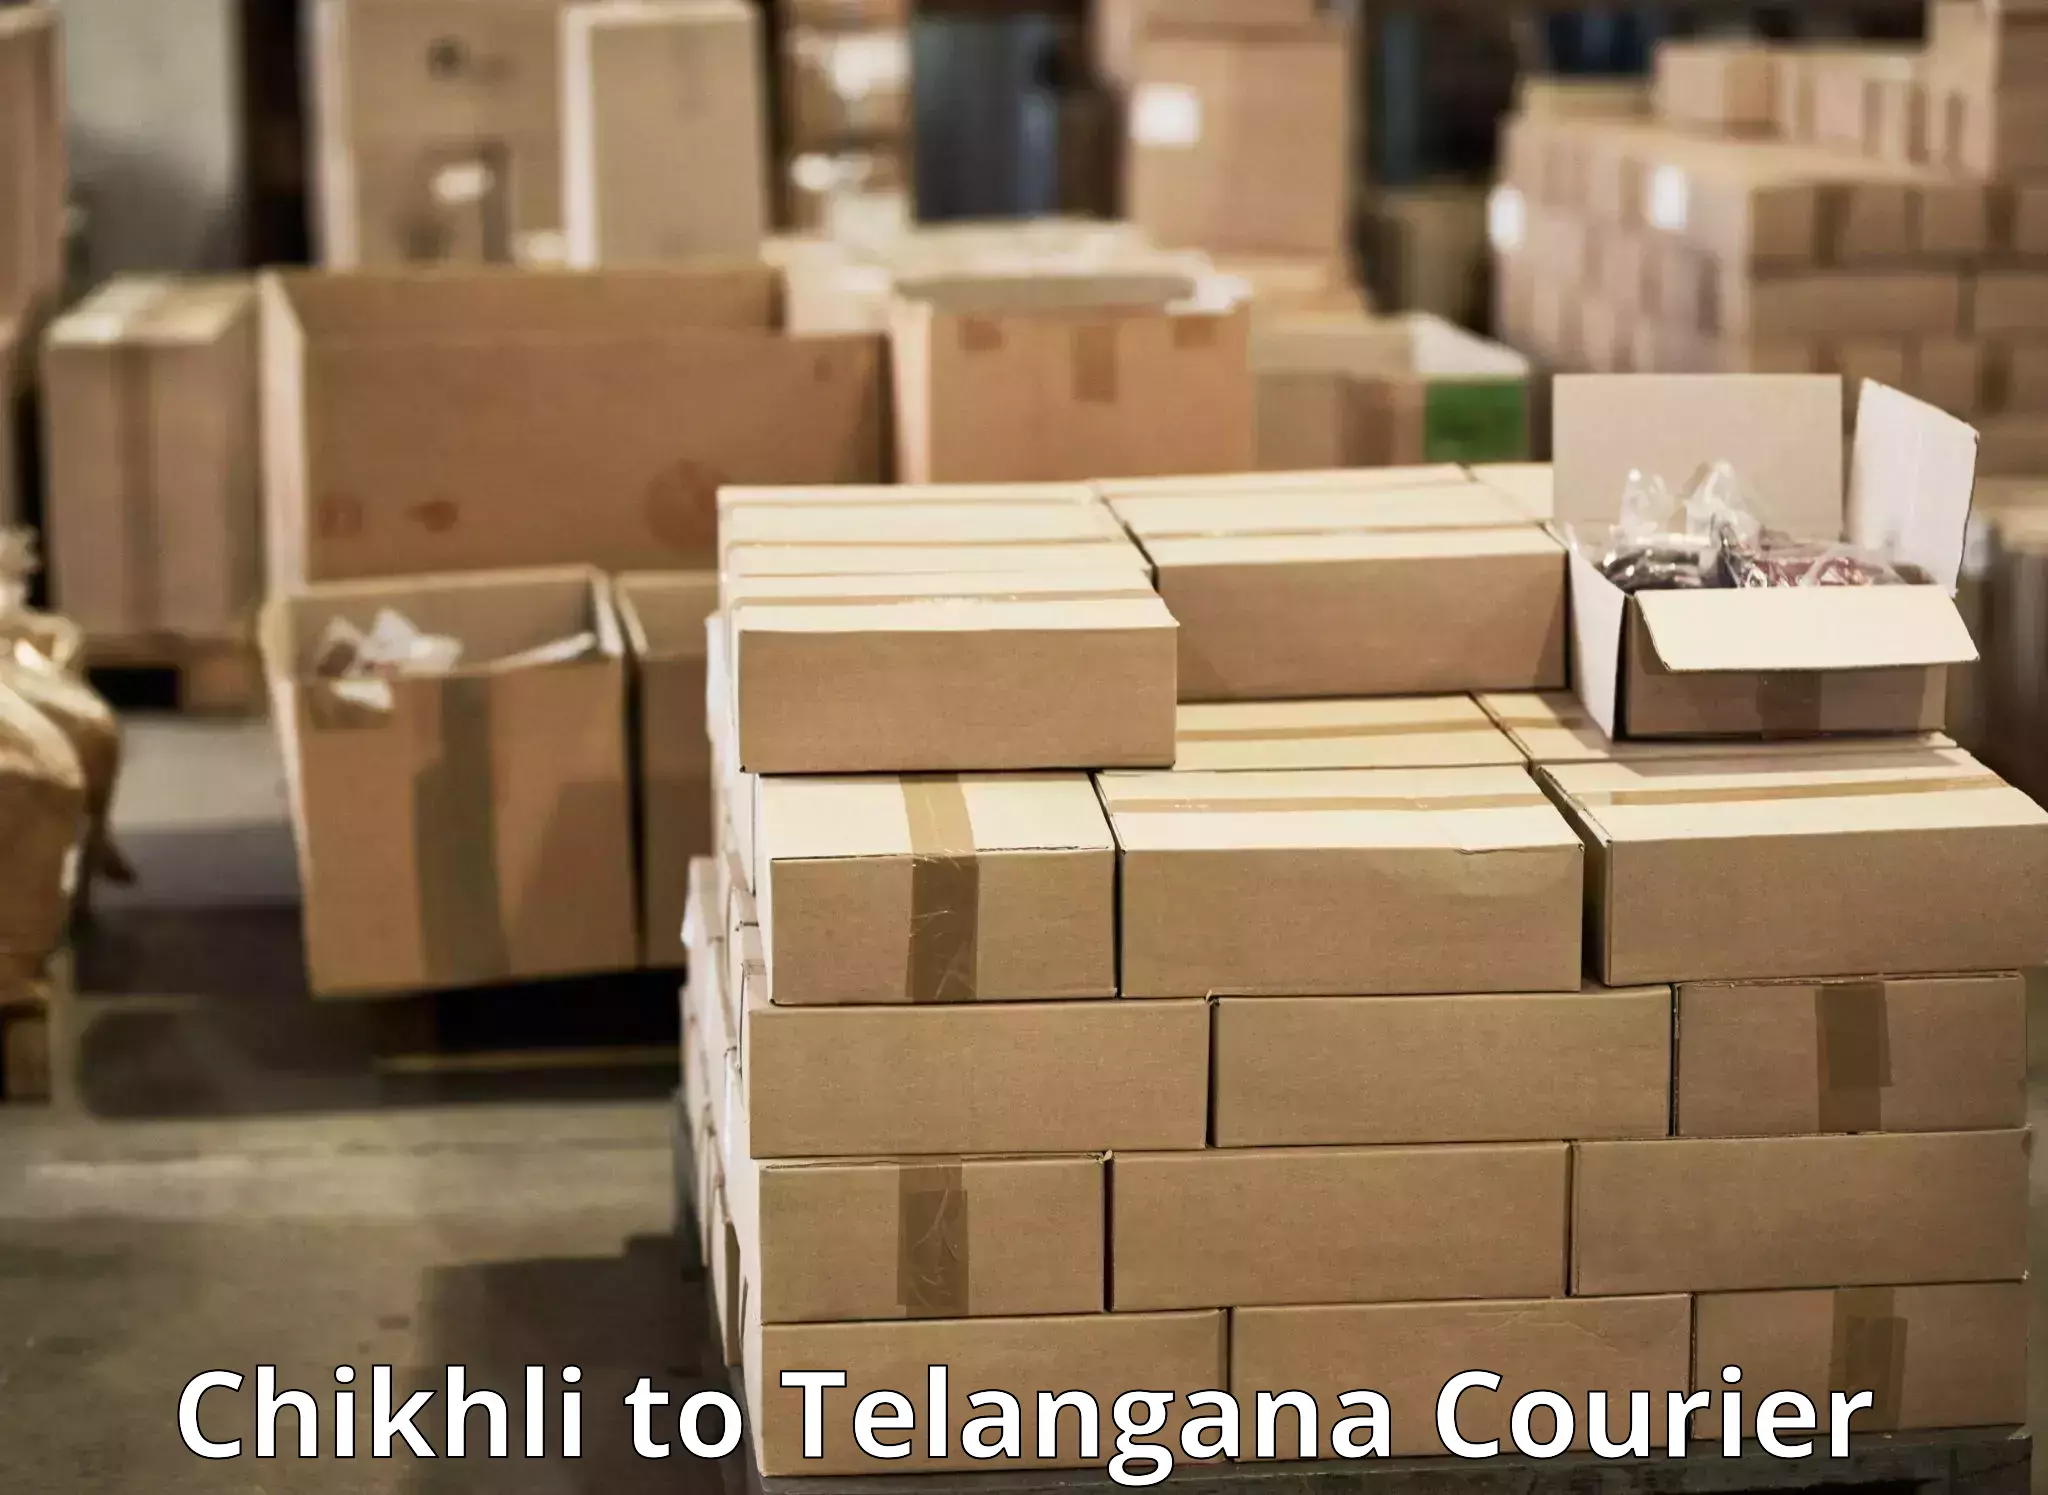 Emergency parcel delivery in Chikhli to Mancherial